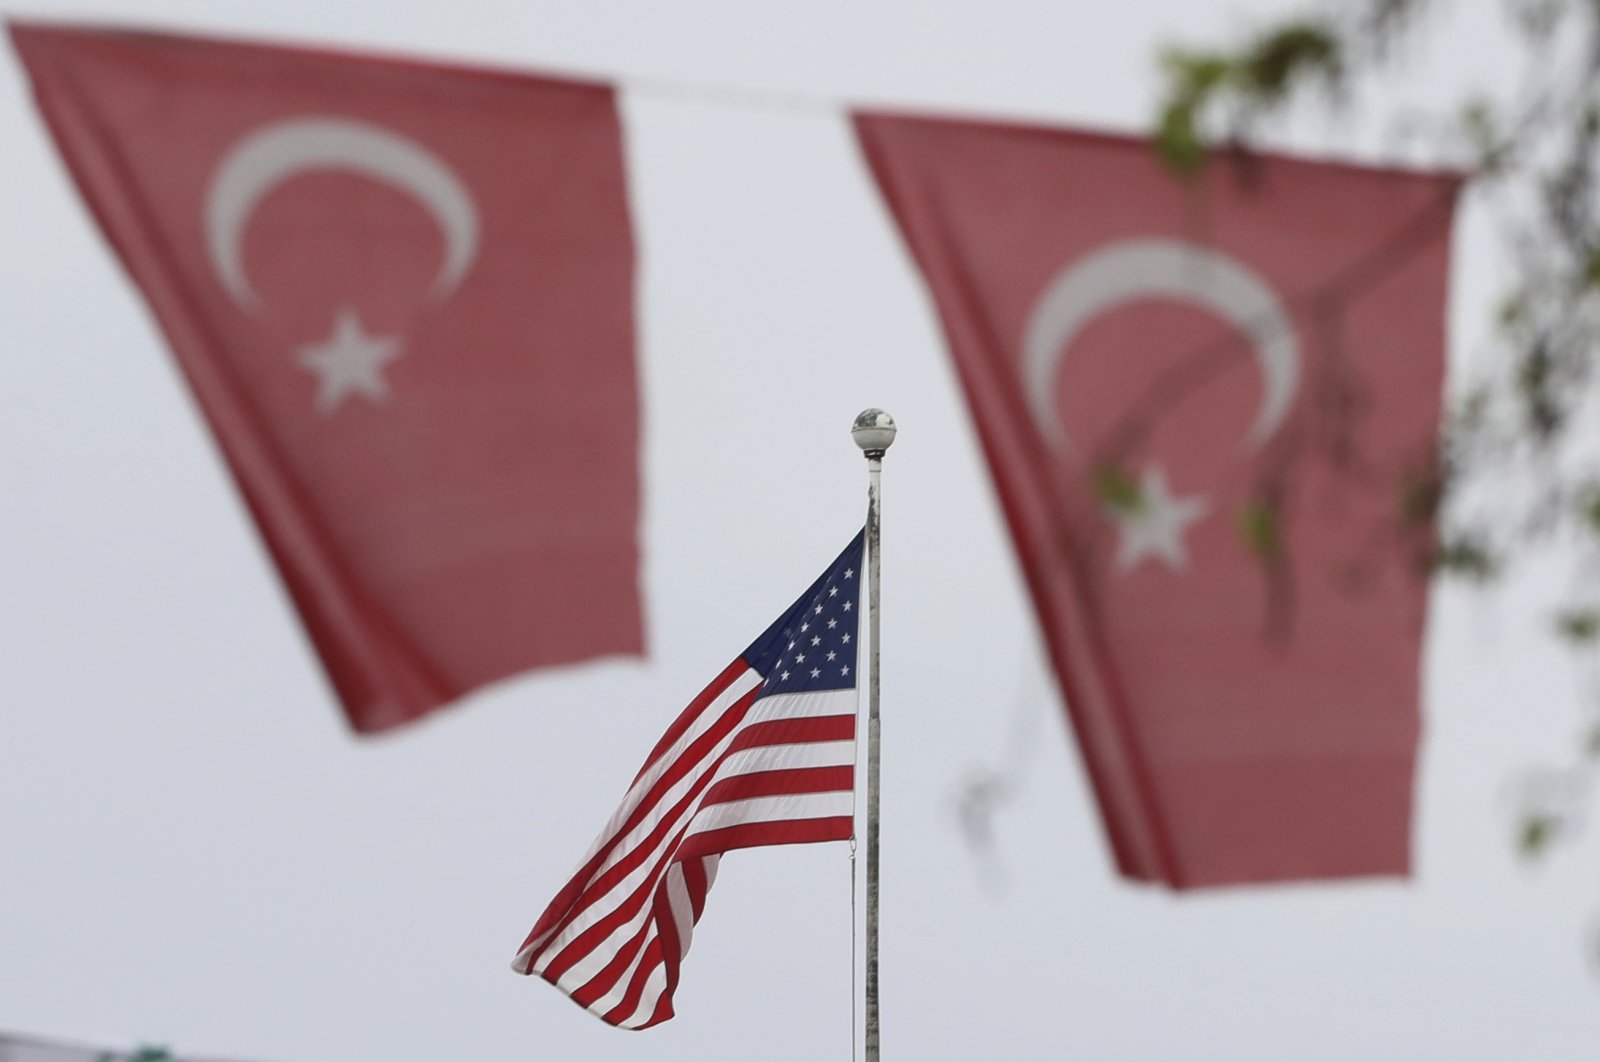 Turkish flags decorate a street outside the United States Embassy in Ankara, Turkey, April 25, 2021. (AP File Photo)